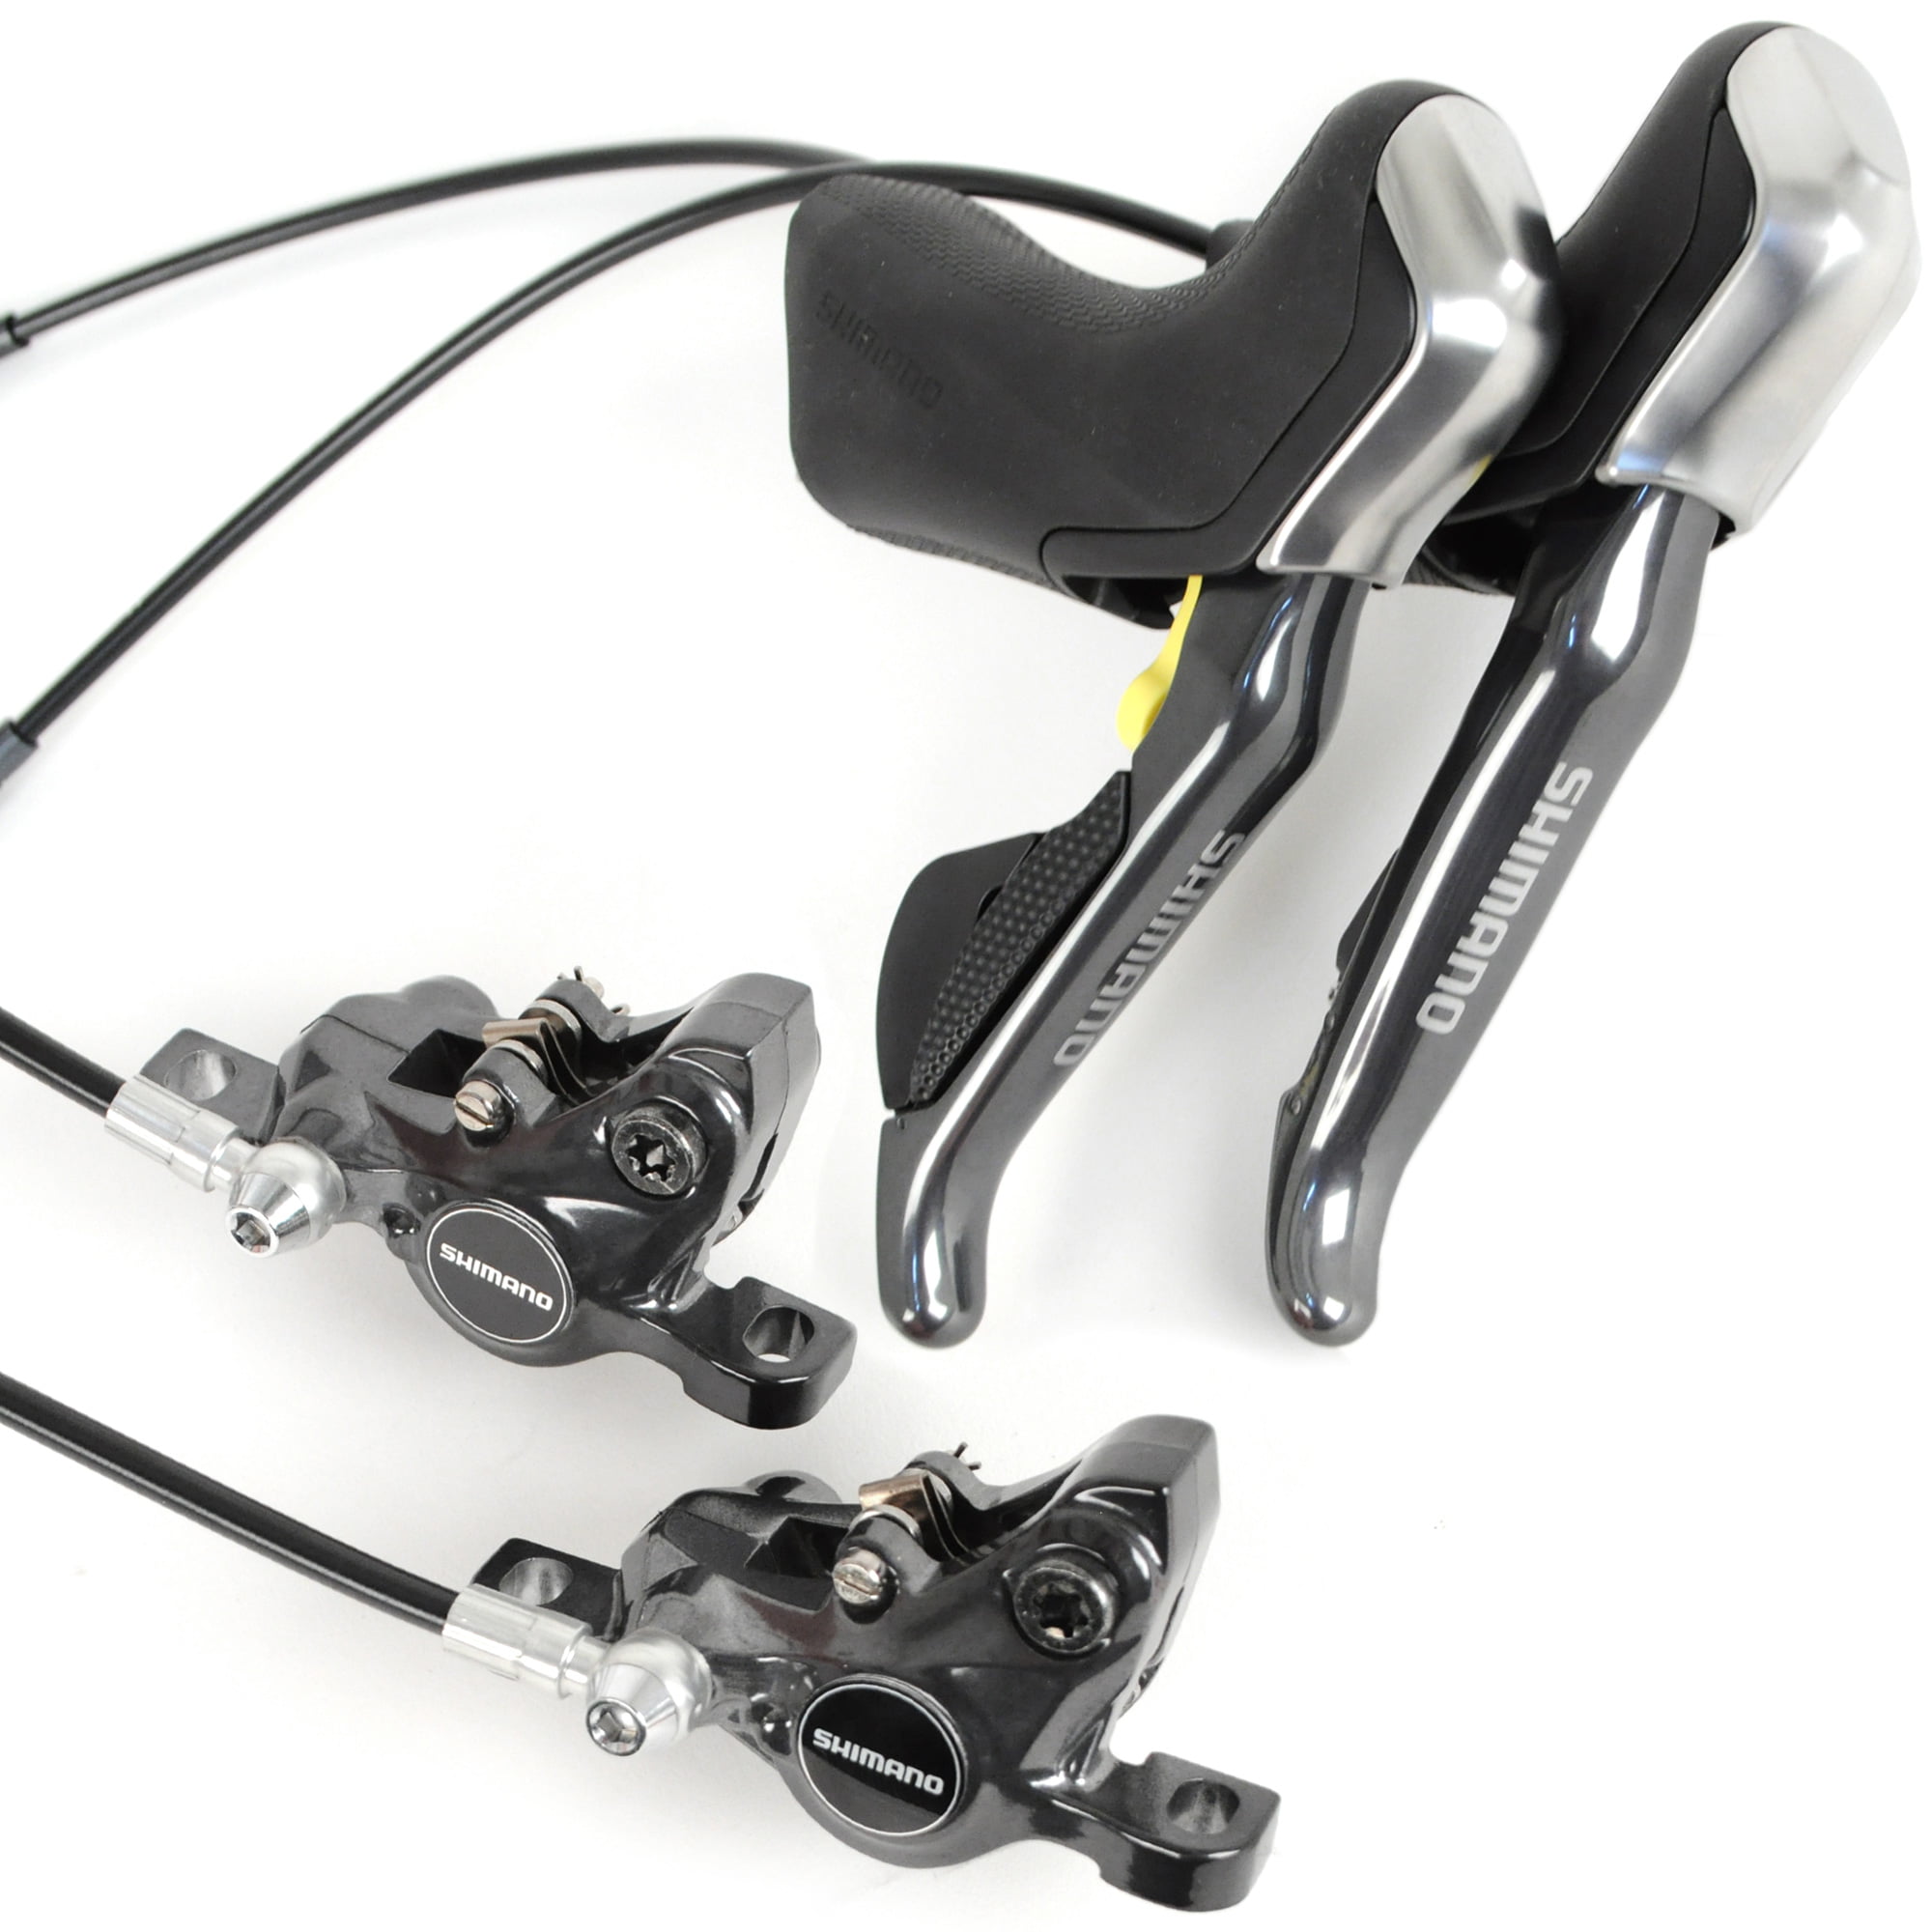 Shimano ST-R785+BR-R785 Di2 Electronic 2x11S Shifters Hydraulic Disc Brakes Set